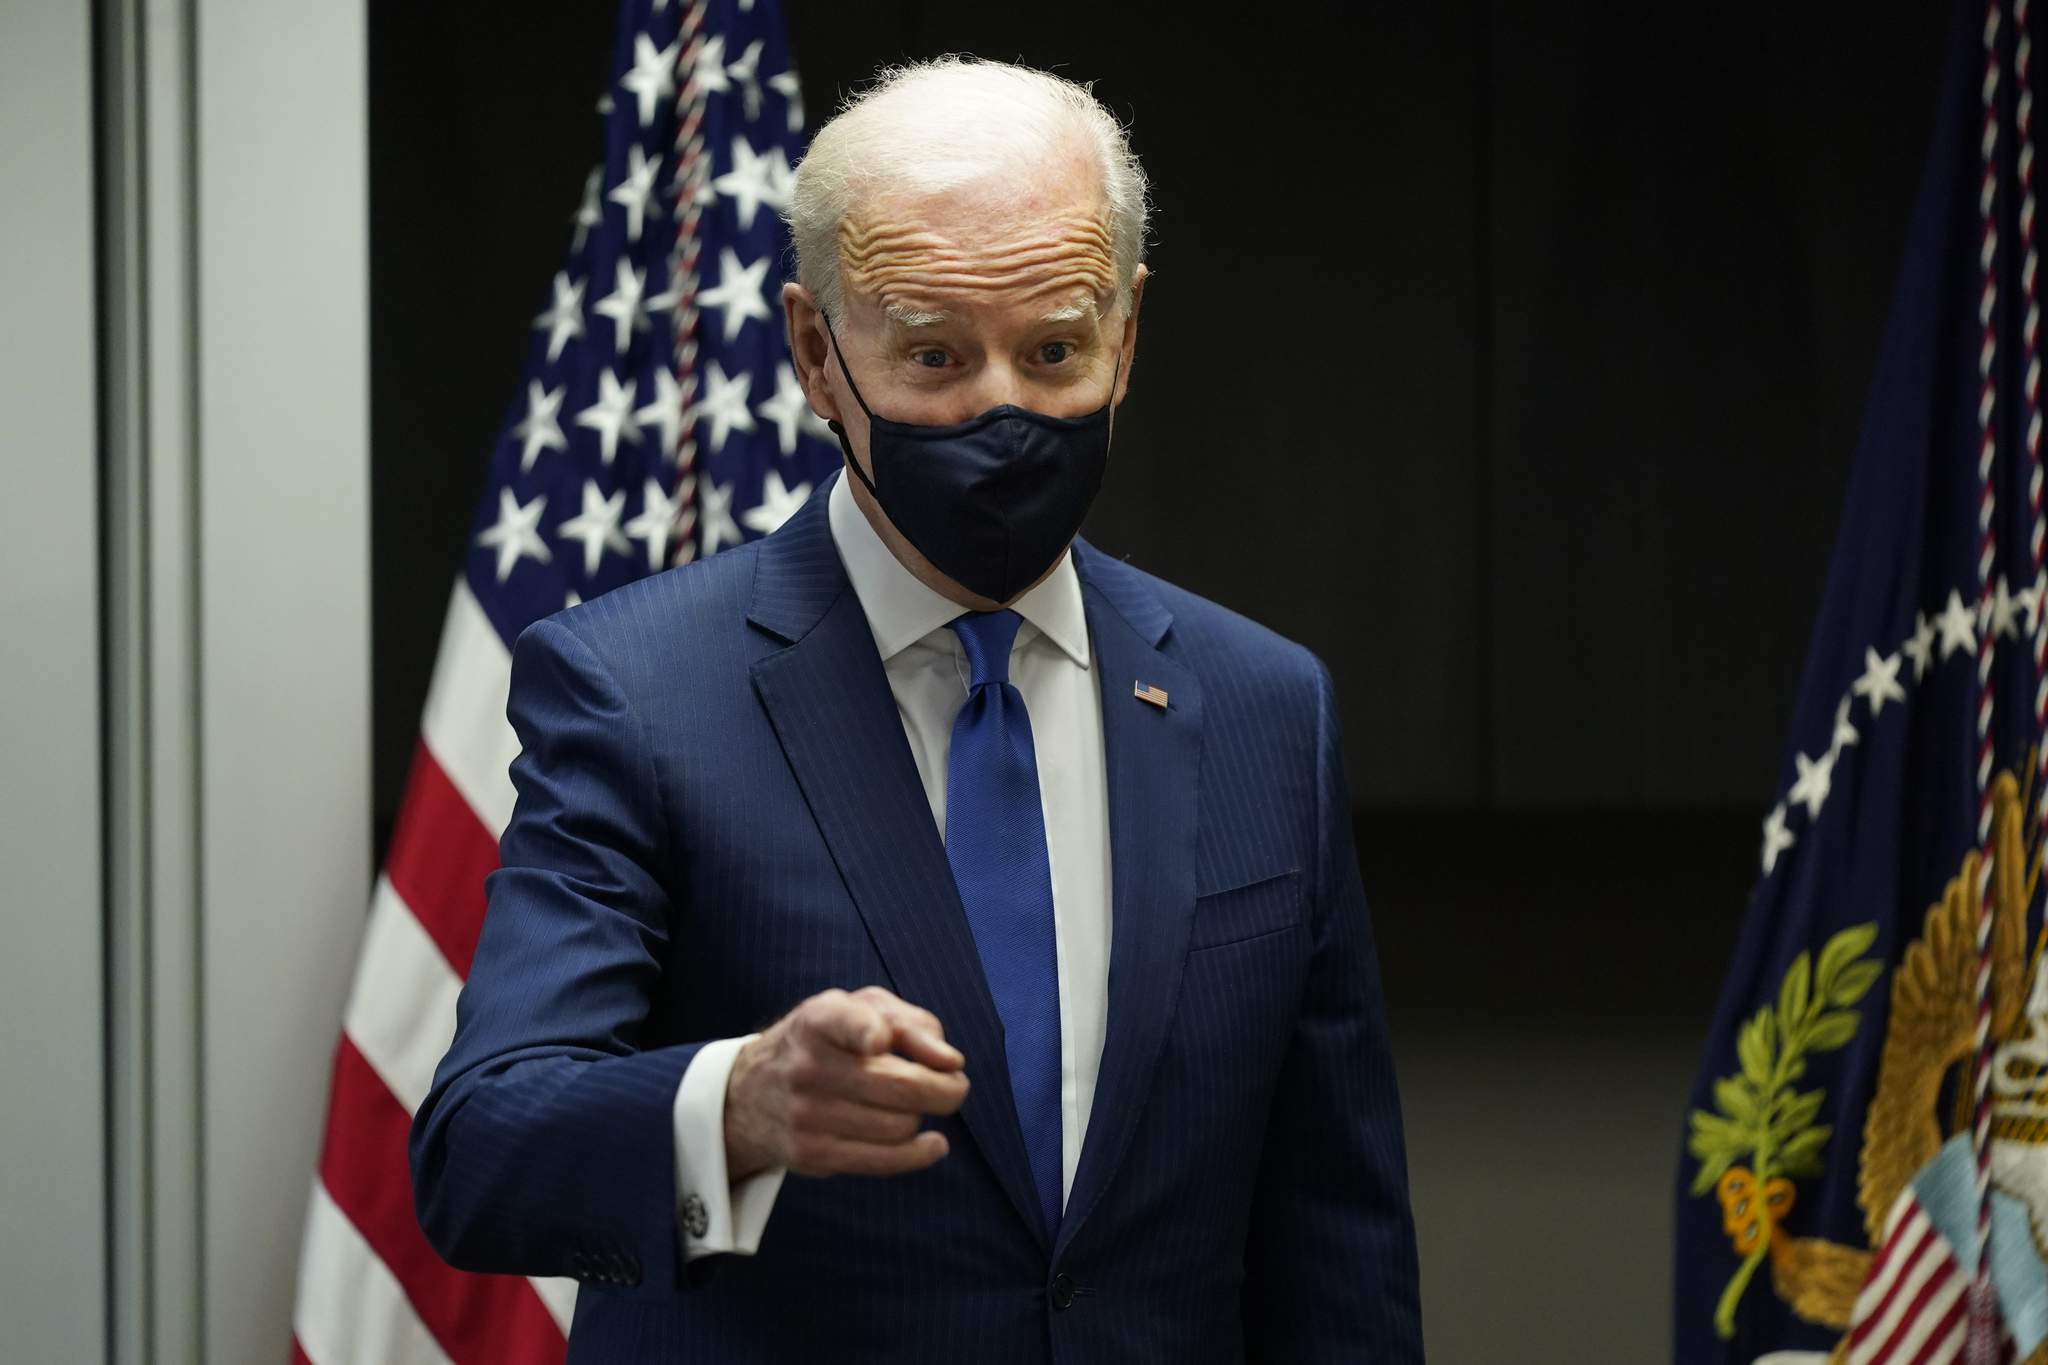 Biden's top aides unlikely to qualify for relief payments